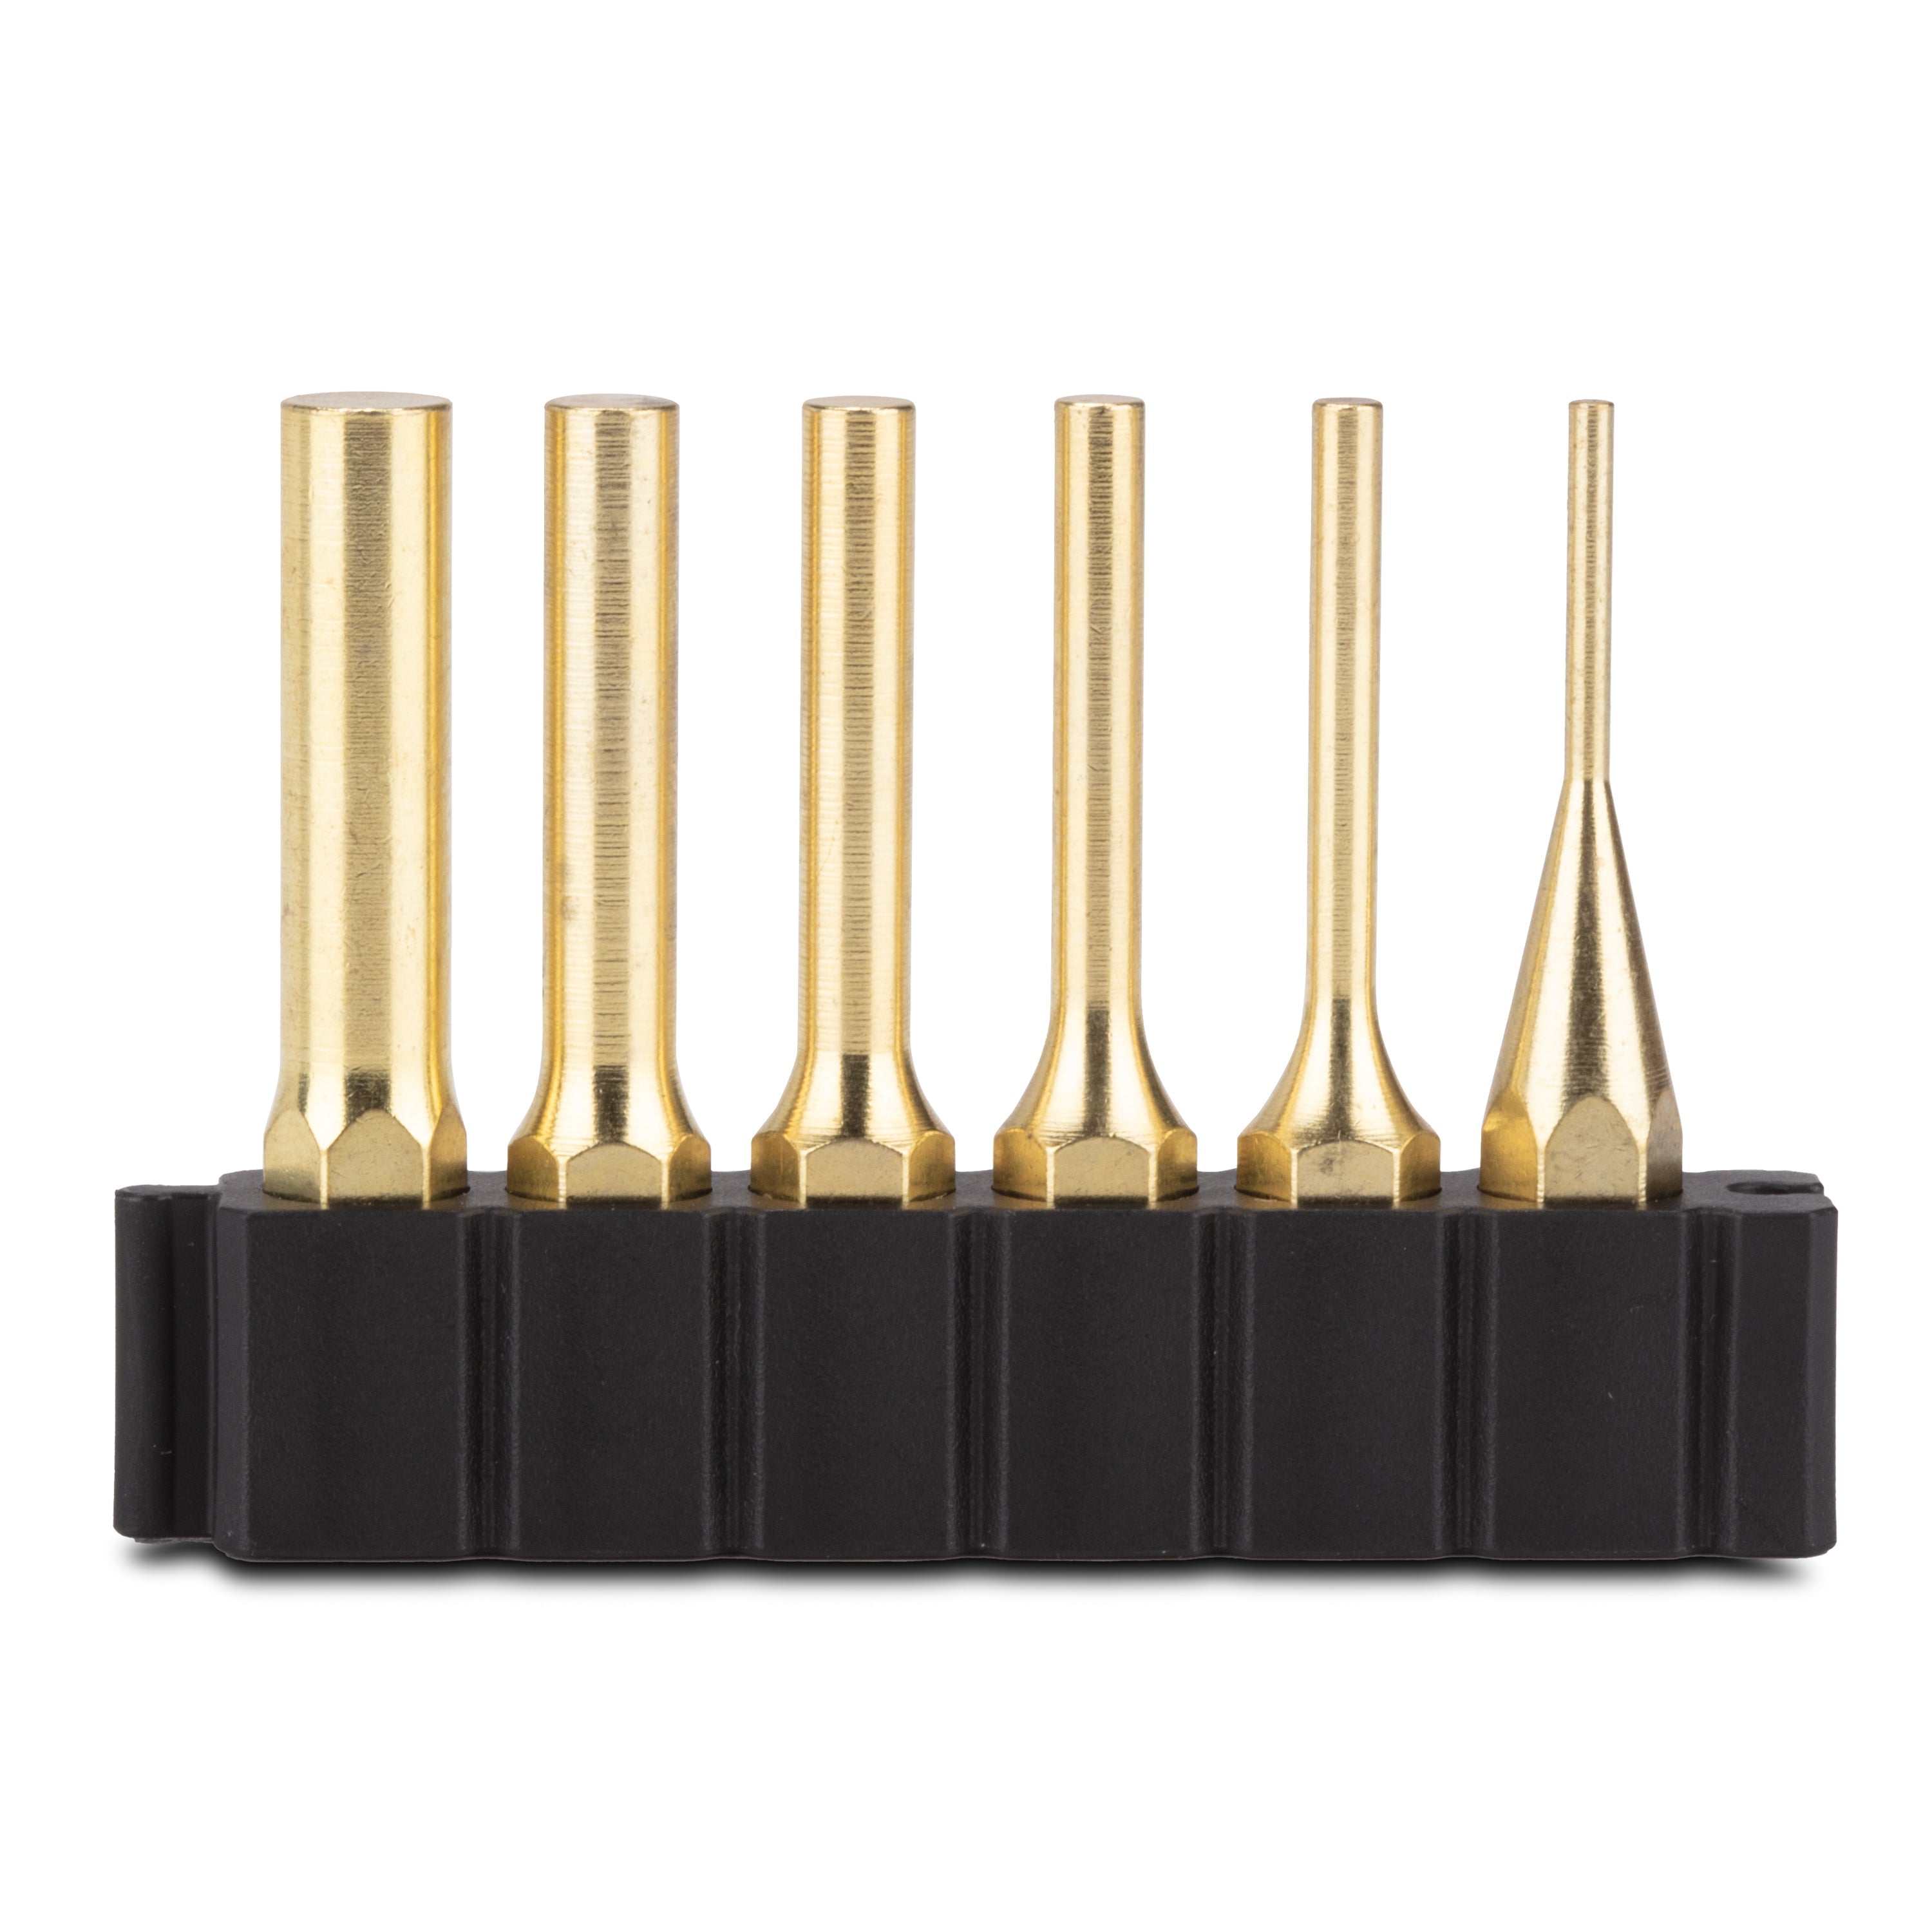 PIN PUNCH SET 18-piece Brass and Carbon Steel Pin Punch Set WITH